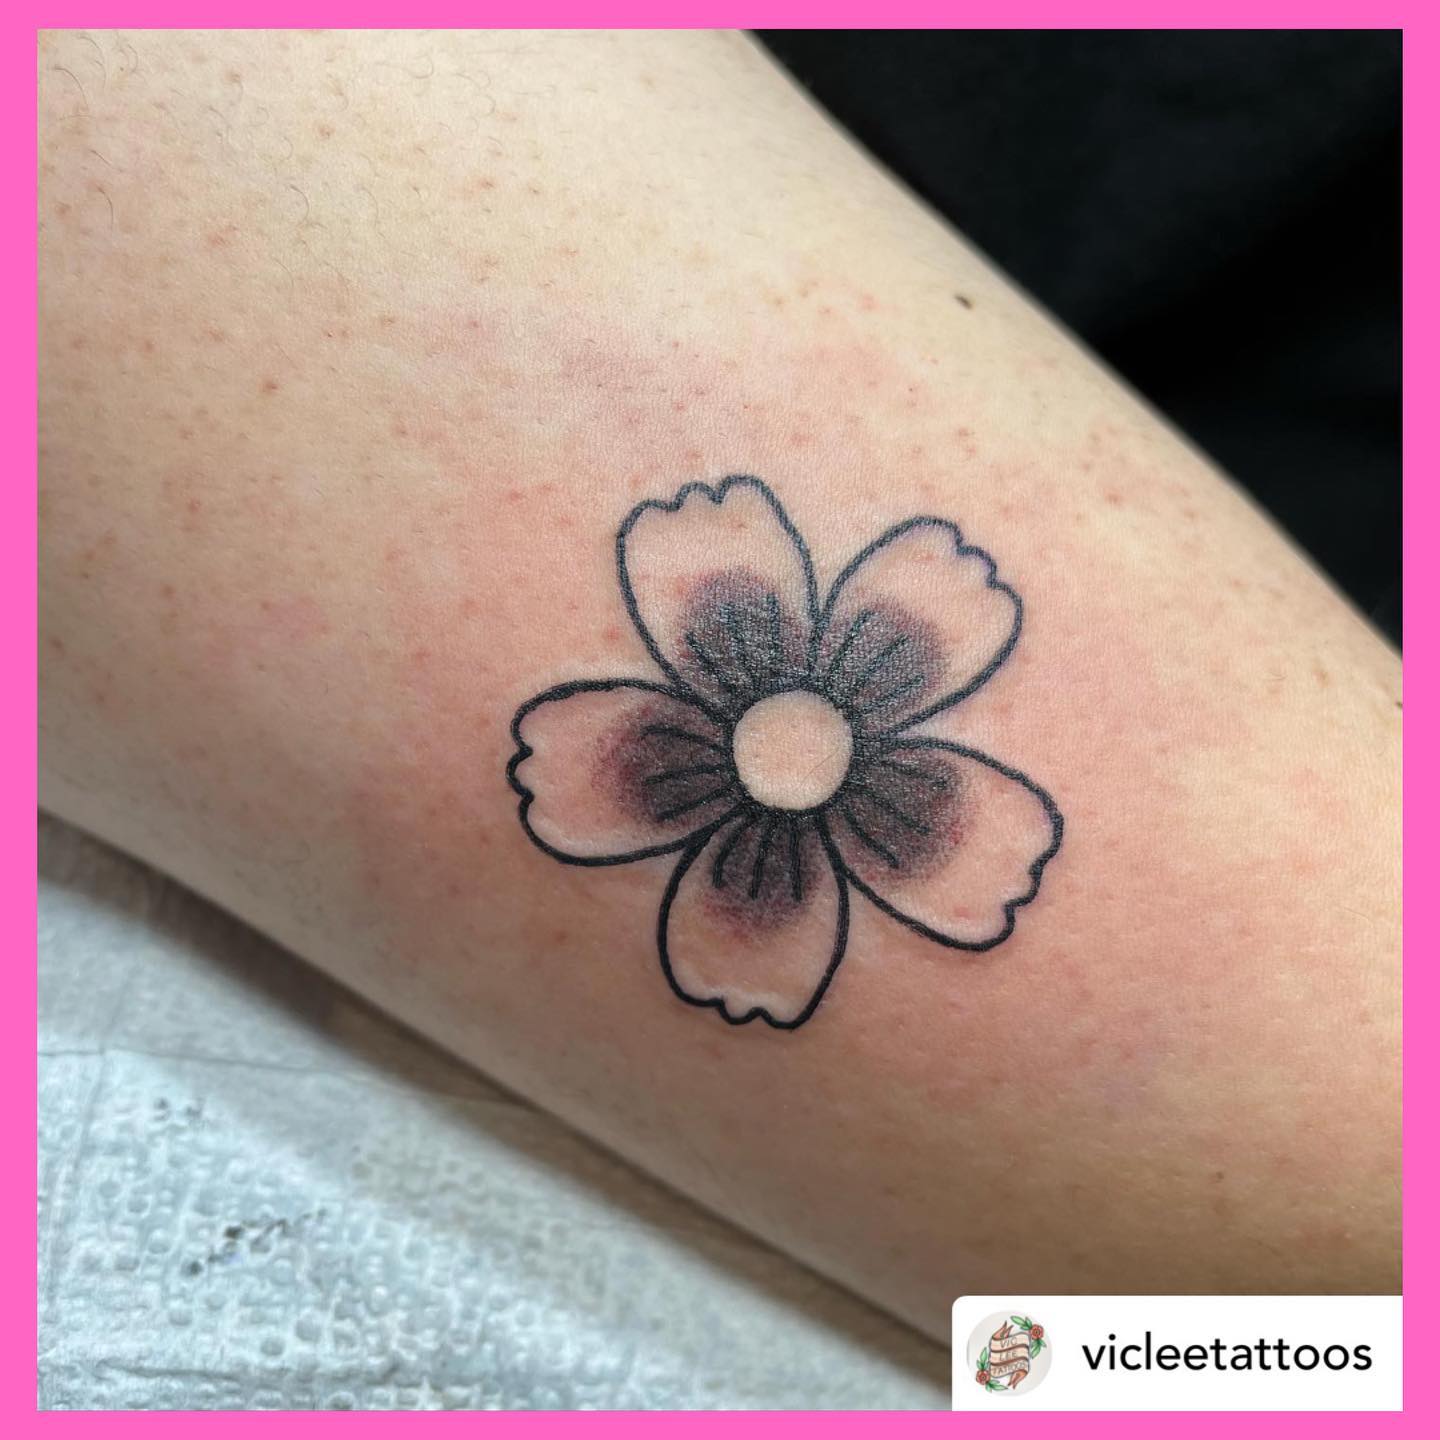 Tattoo by @vicleetattoos Link in bio to book.